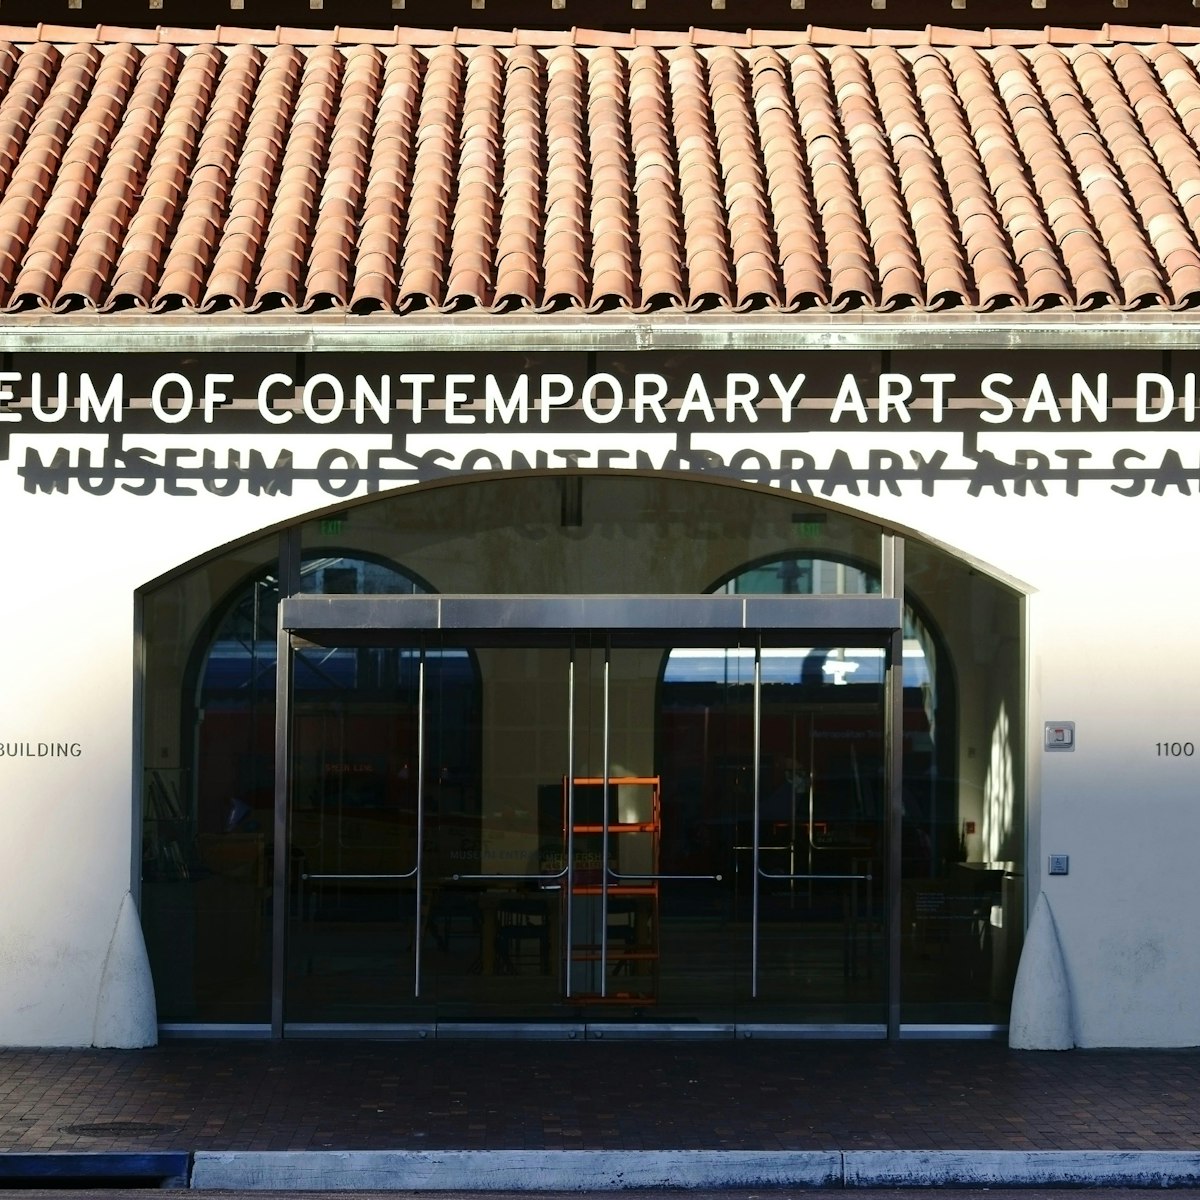 FGHCGA Museum of Contemporary Art San Diego

San Diego, United States - December 25, 2015: The entrance to the Museum of Contemporary Art San Diego on December 25, 2015 in San Diego.
